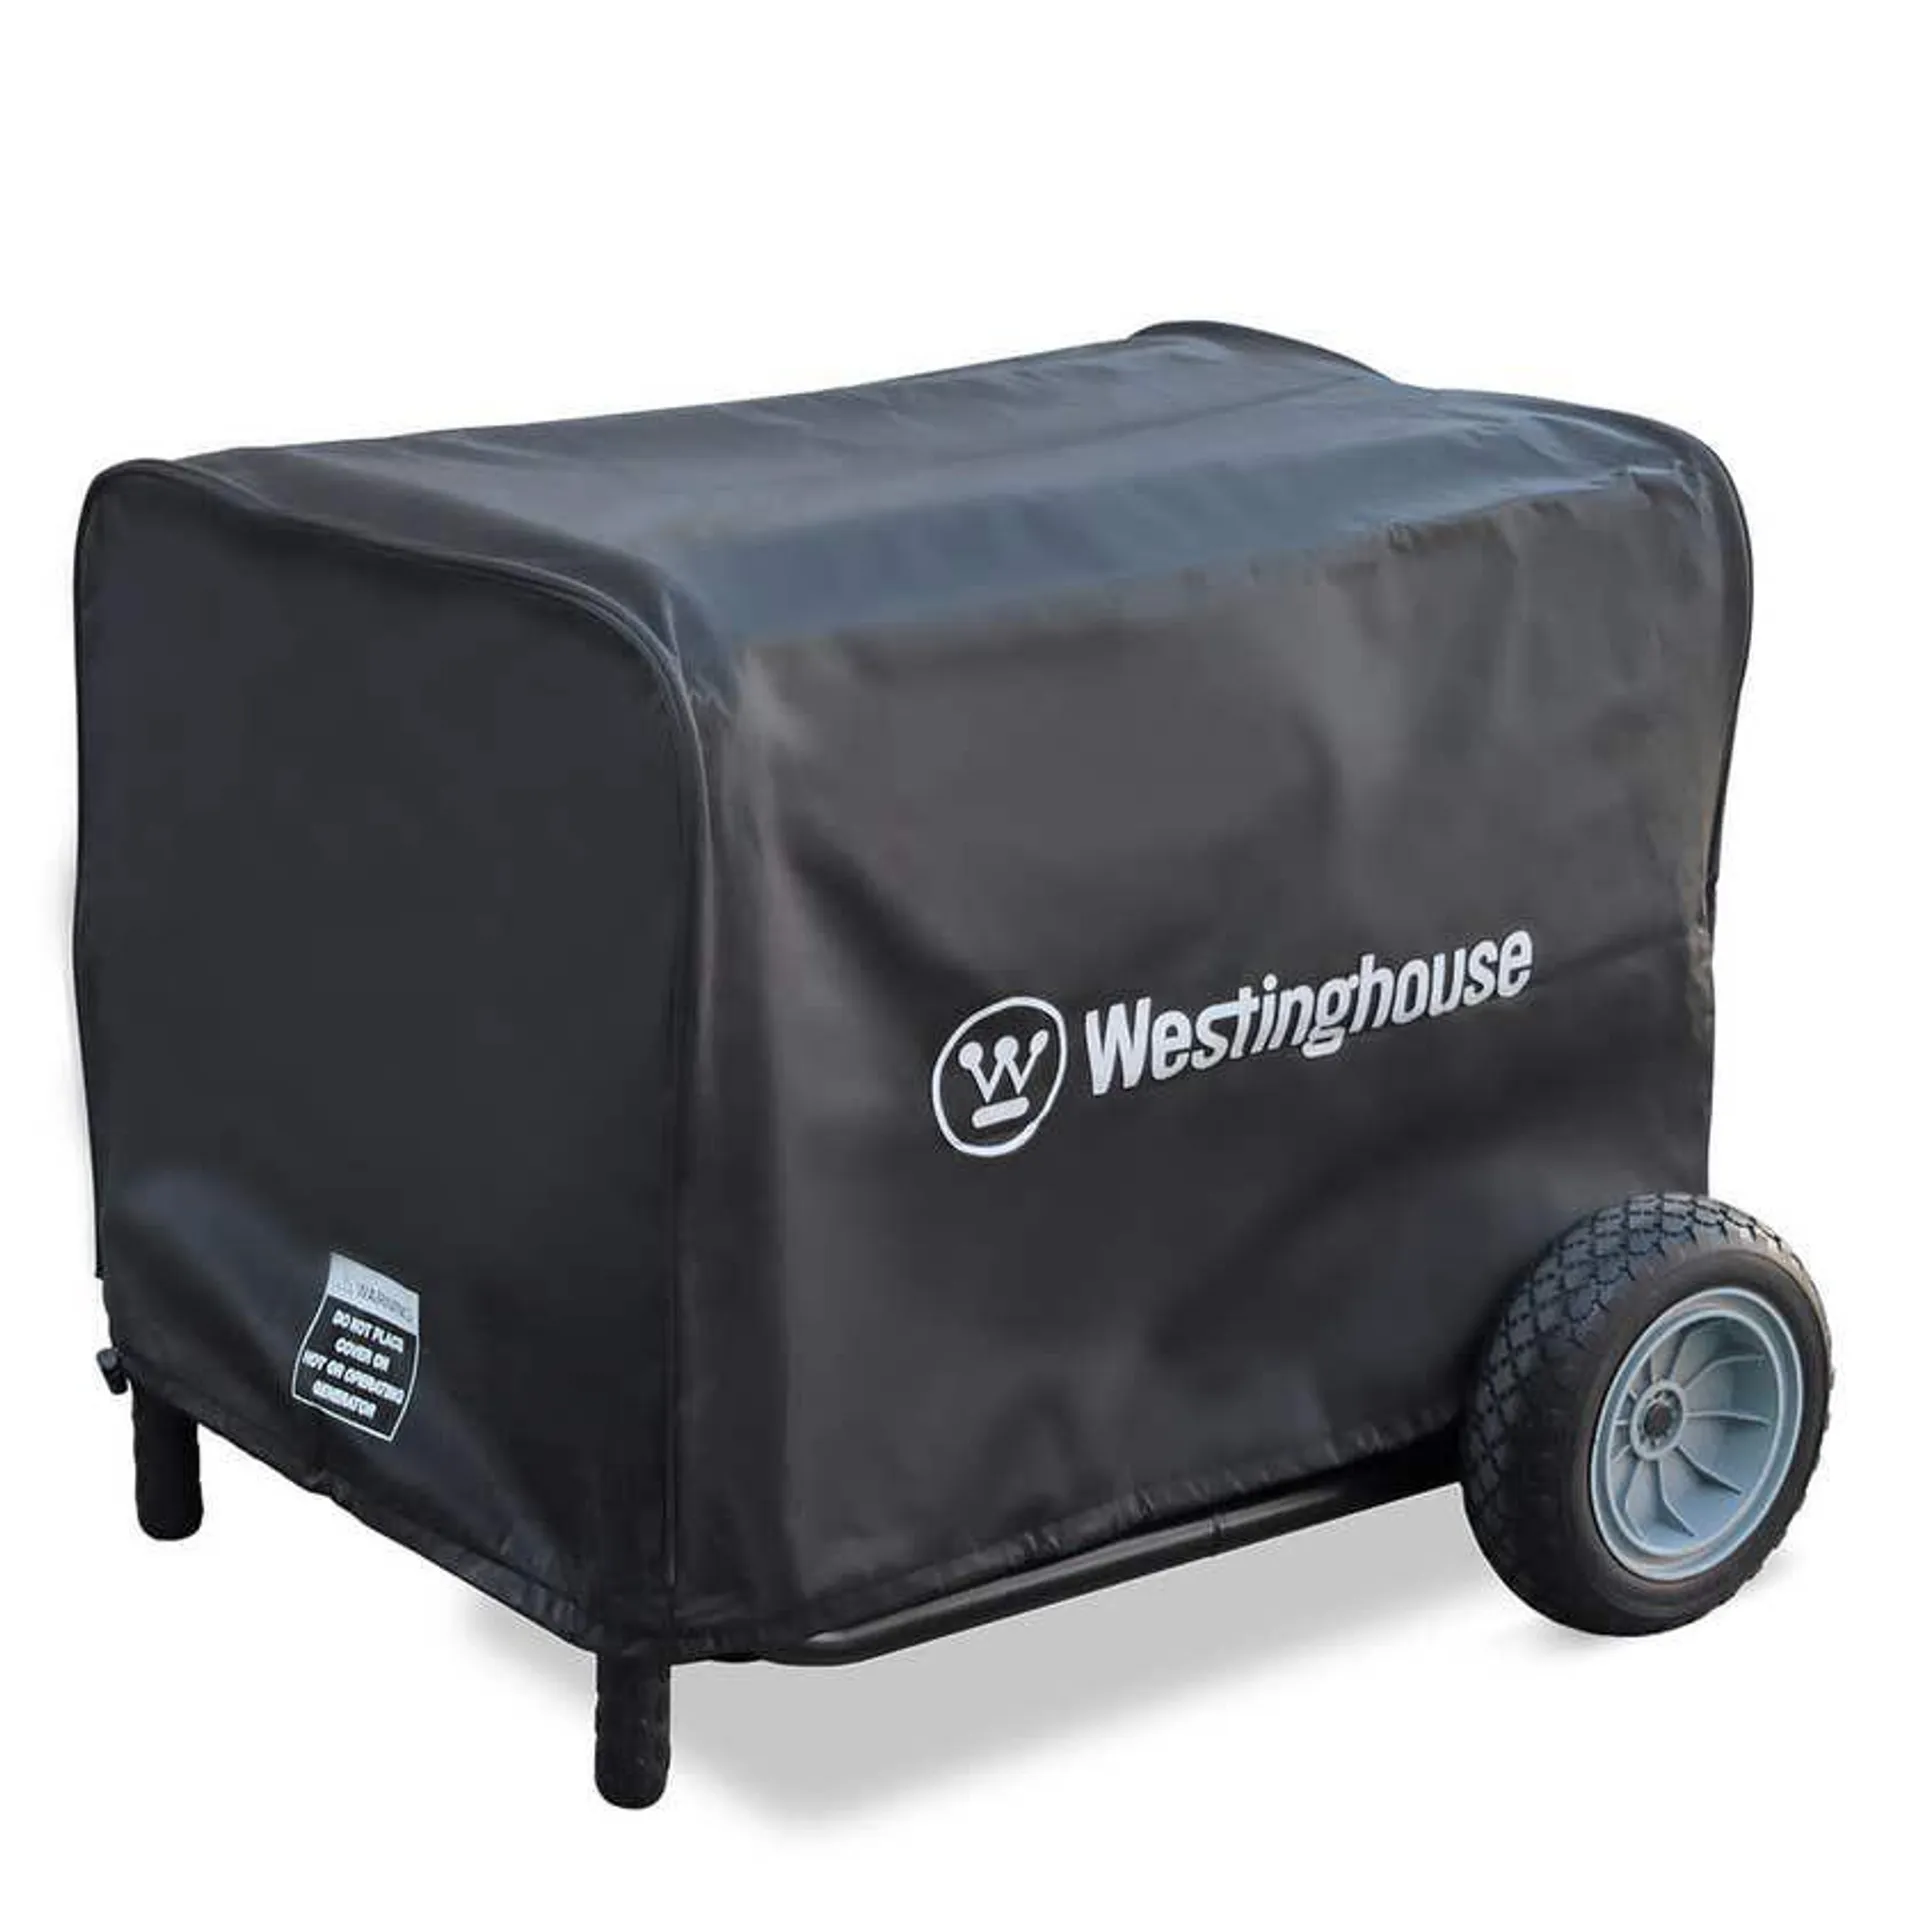 Westinghouse Portable Generator Cover GC745453